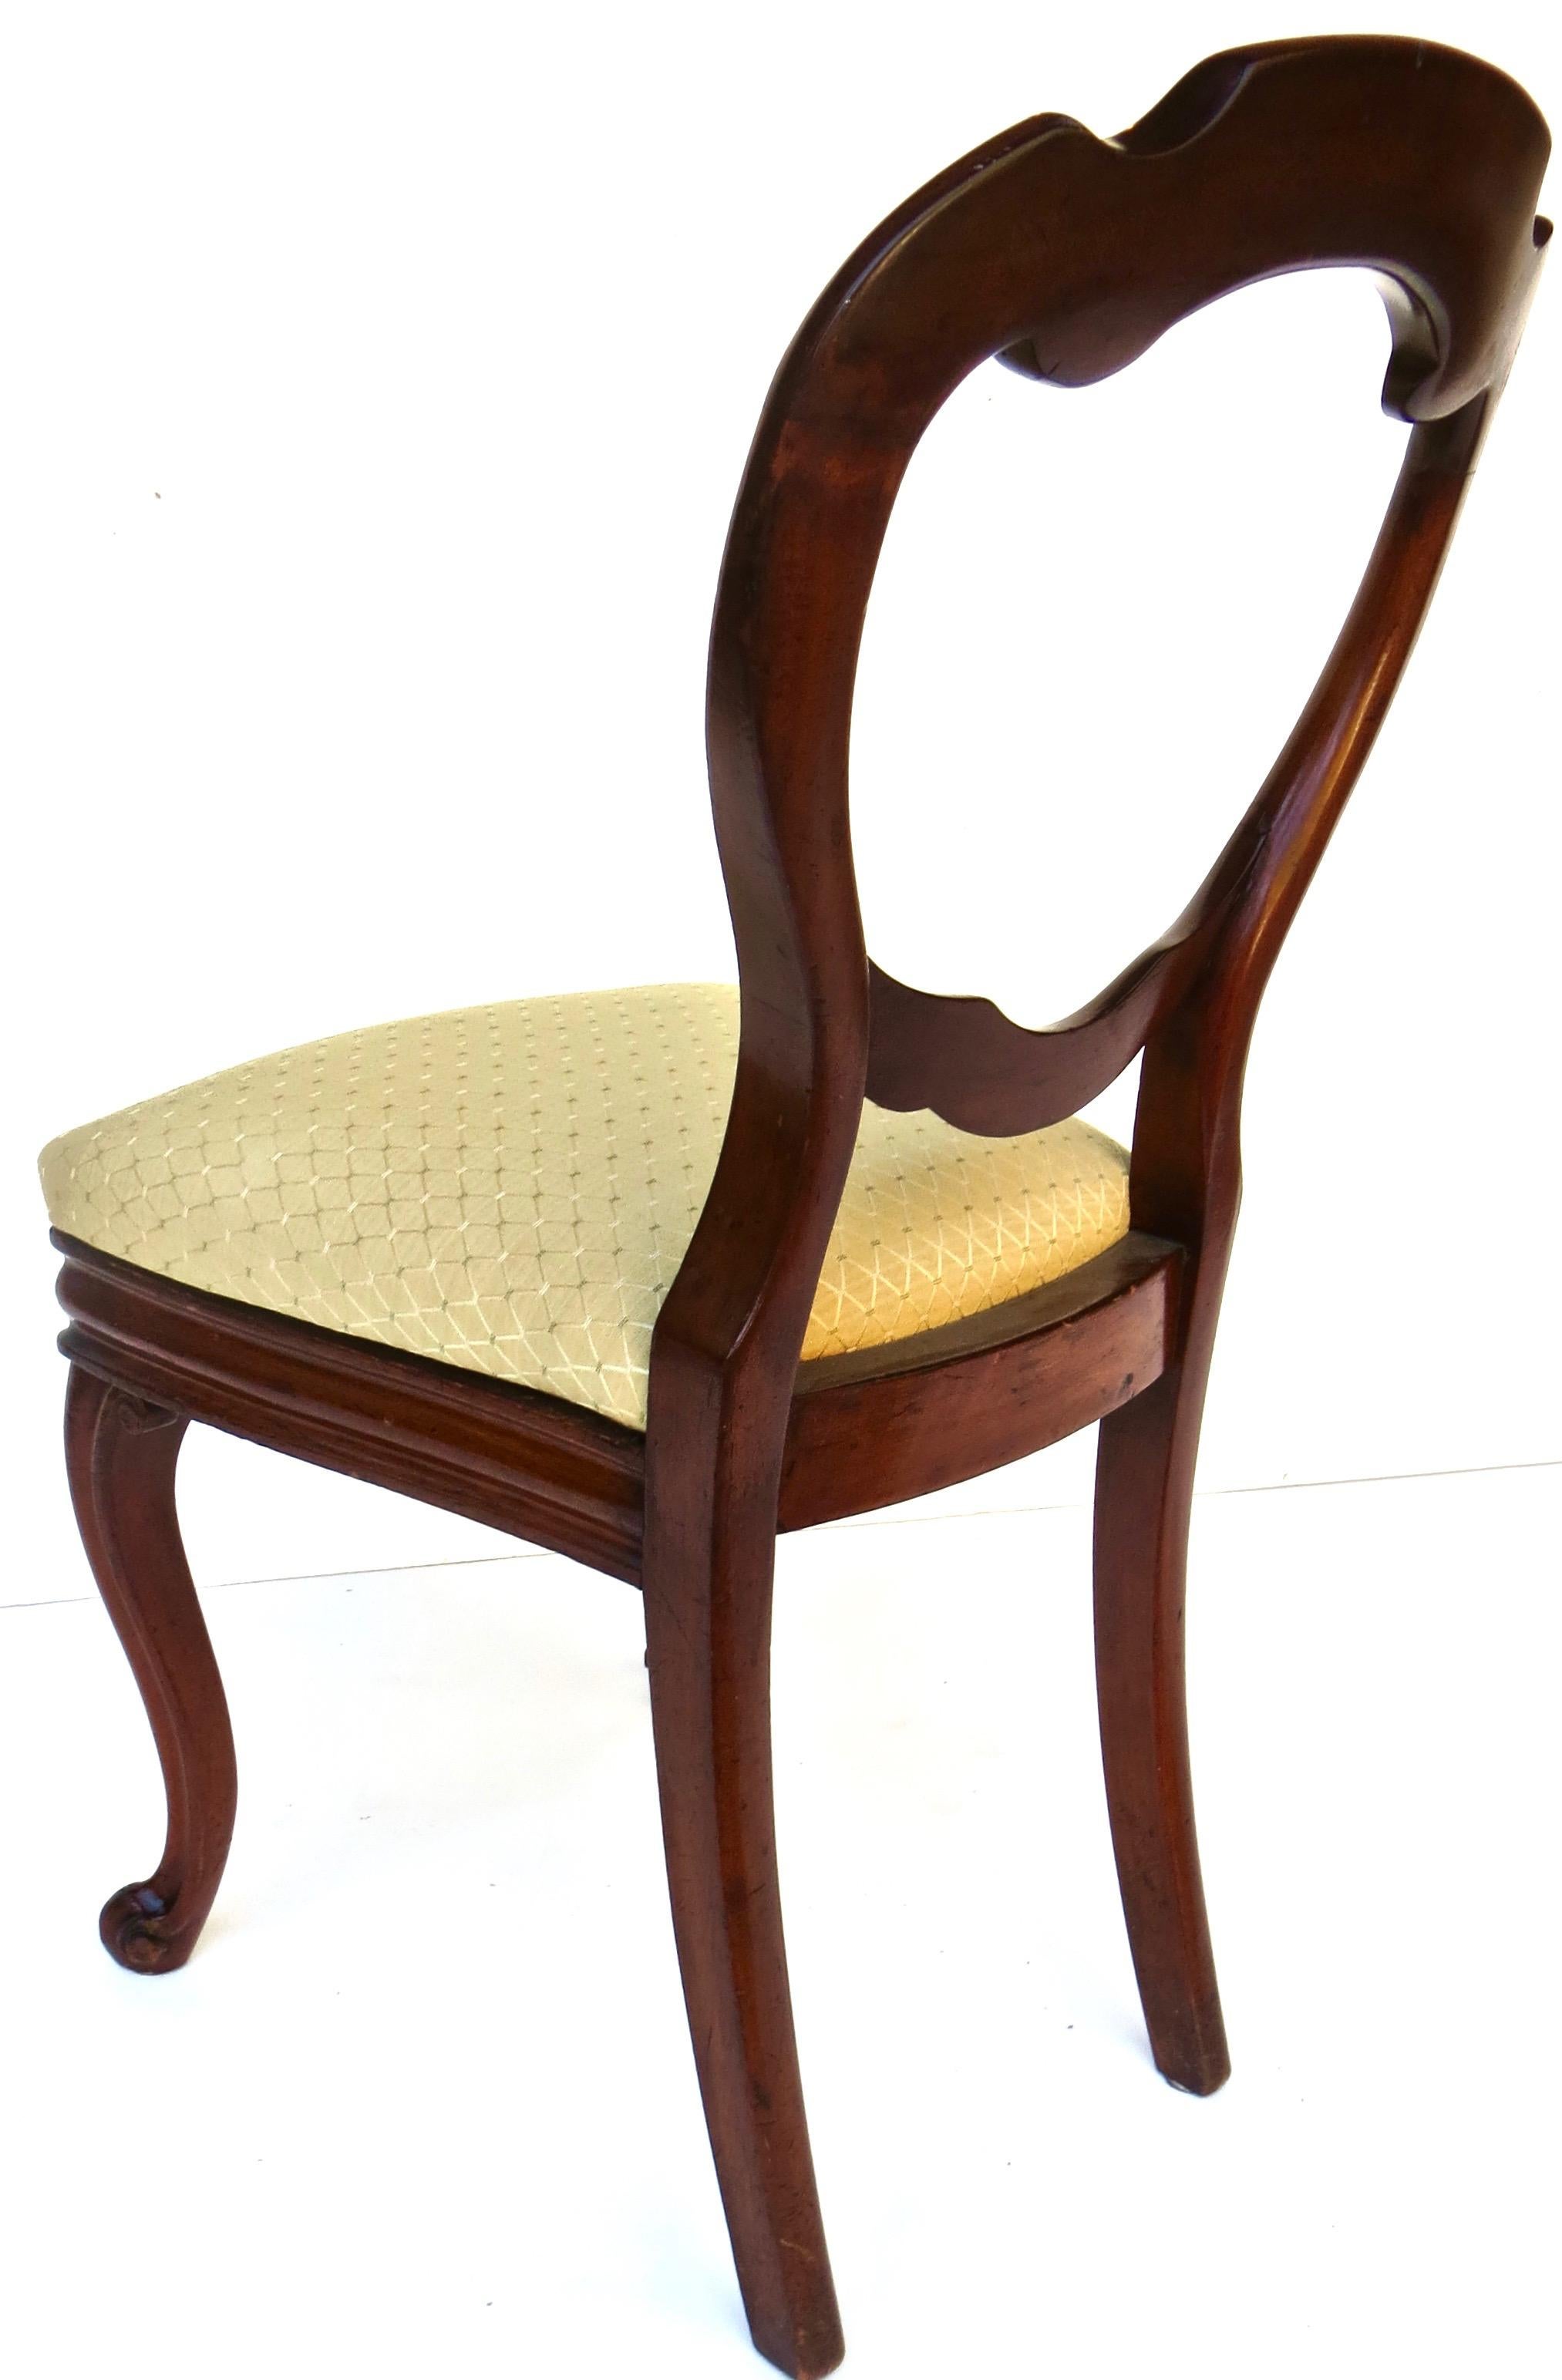 Traditional Victorian Balloon Back Side Chair, English, Circa 1850 In Good Condition For Sale In Incline Village, NV